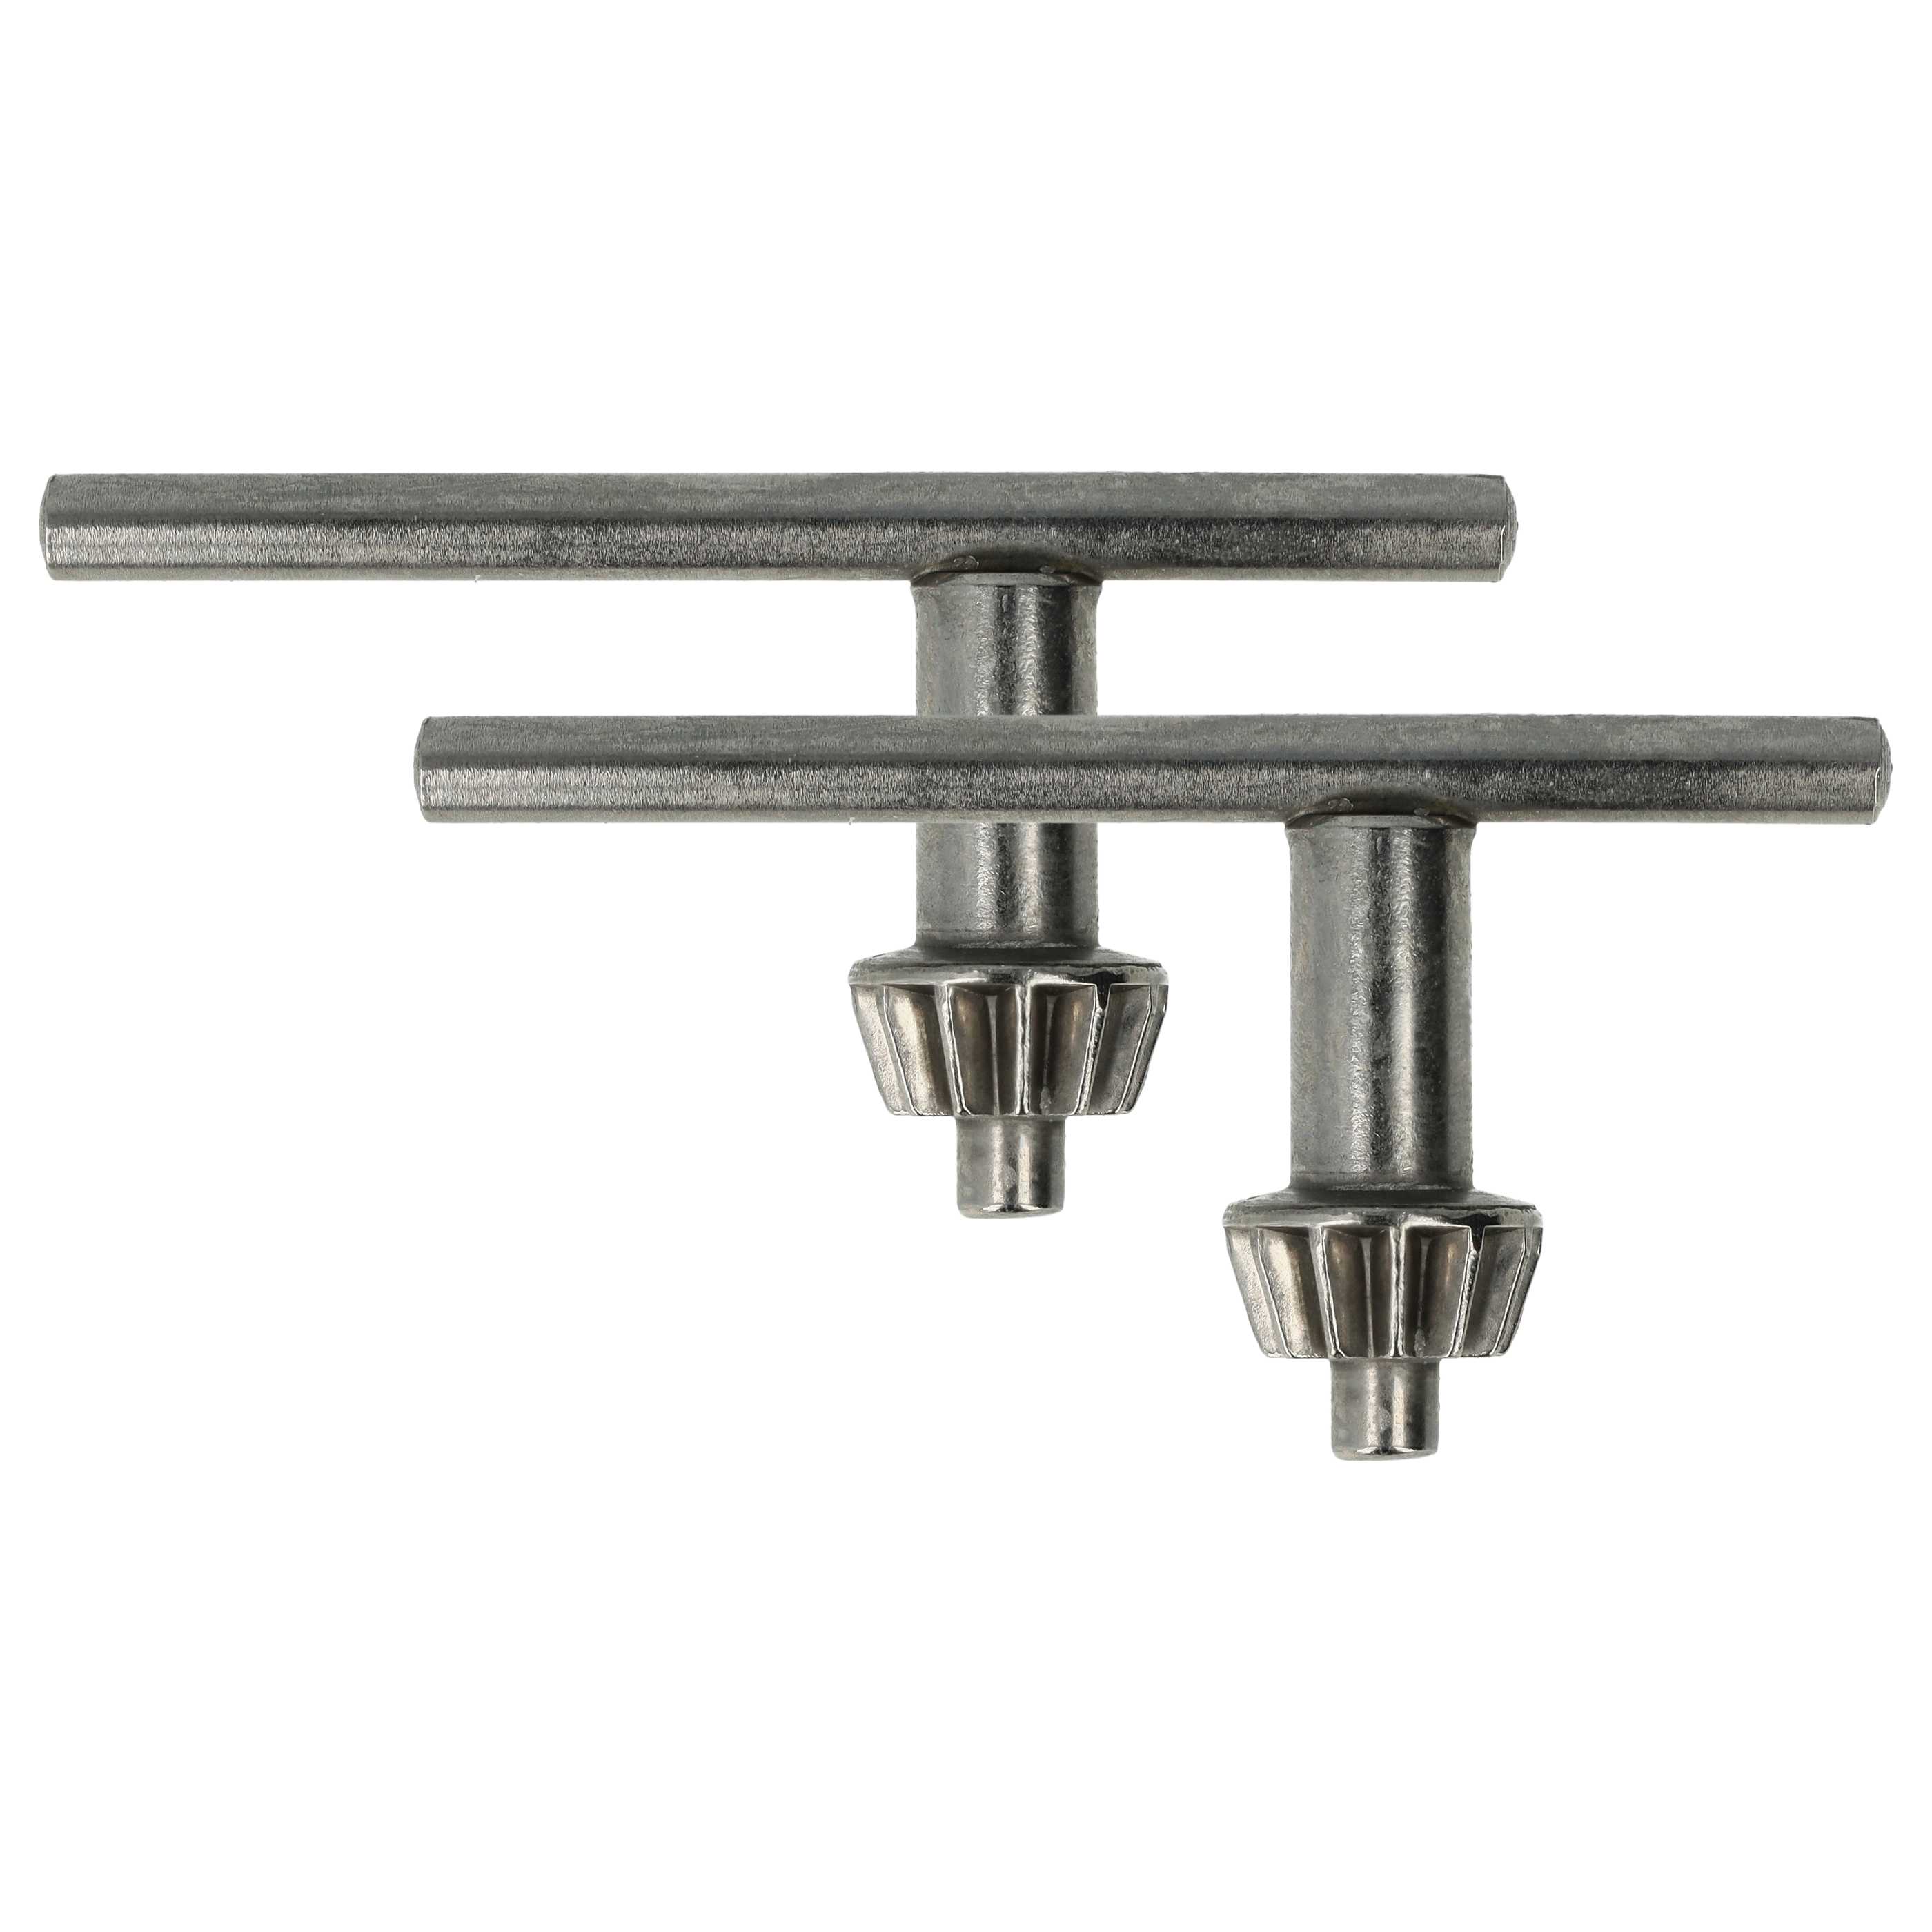 2x Drill Chuck Key S2A 10-13mm replaces Wolfcraft 2630000 for Drills from e.g. Metabo, AEG